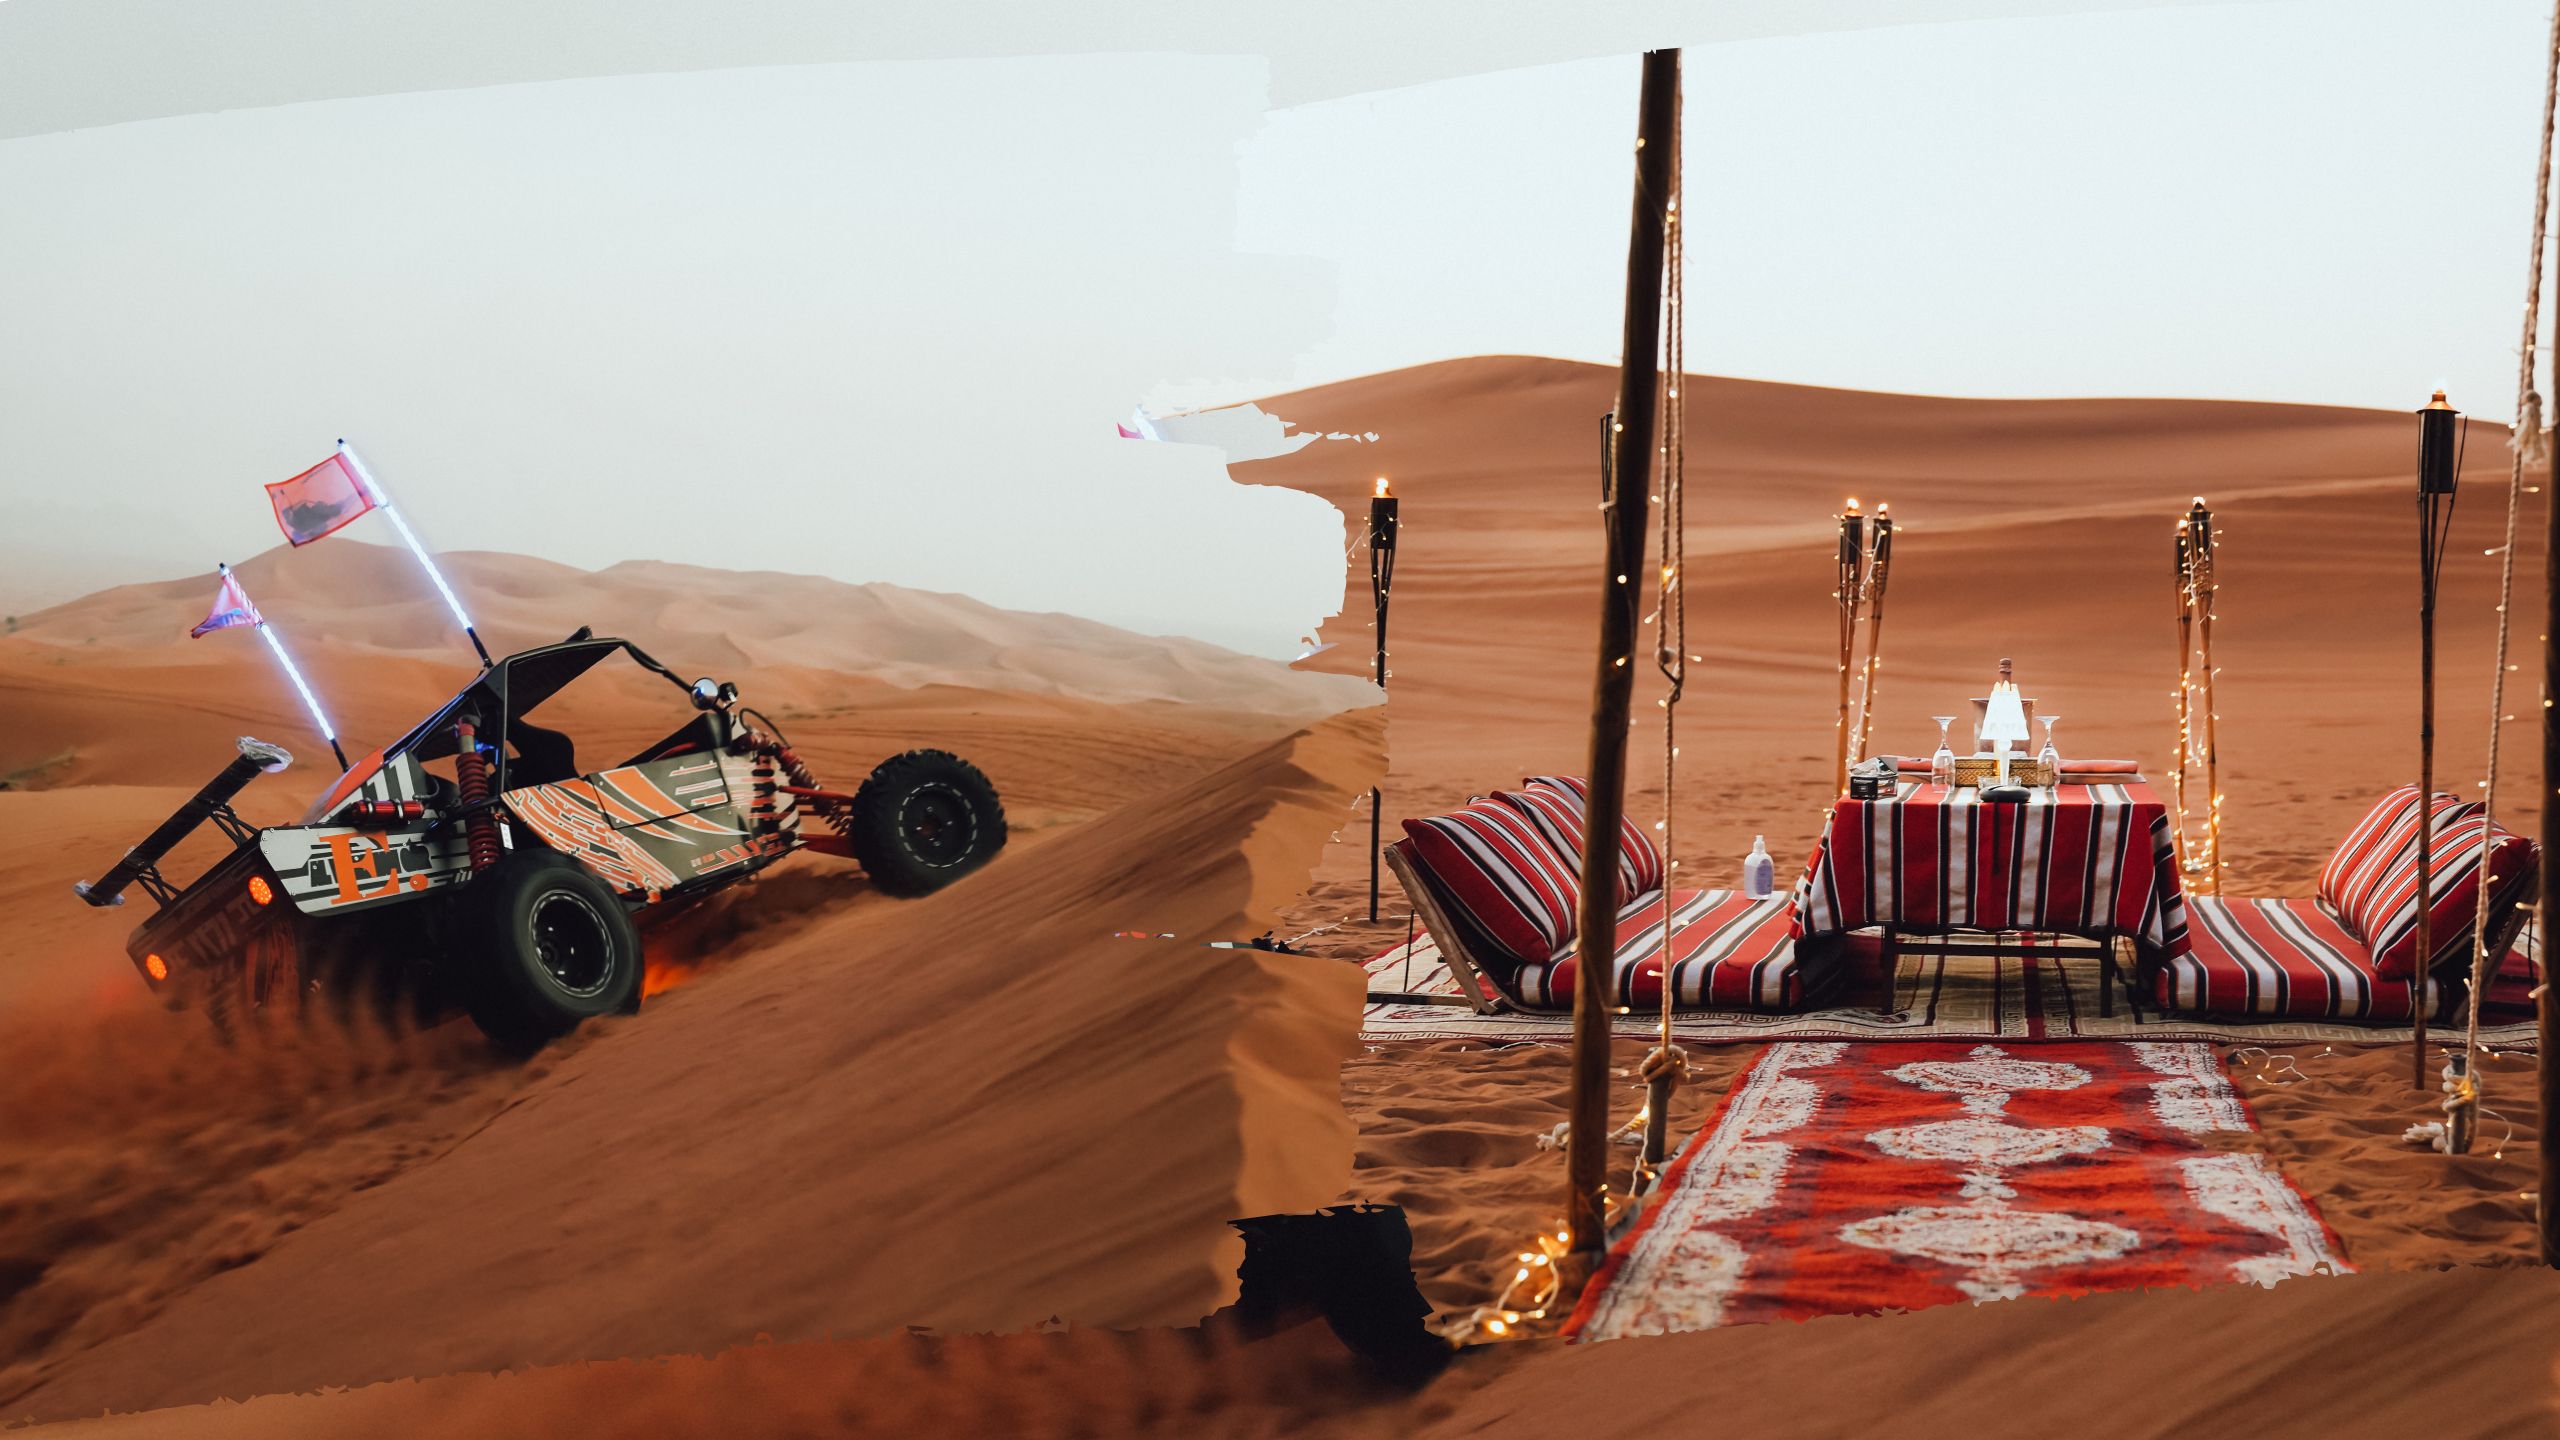 Dune Buggy With Private Dinner